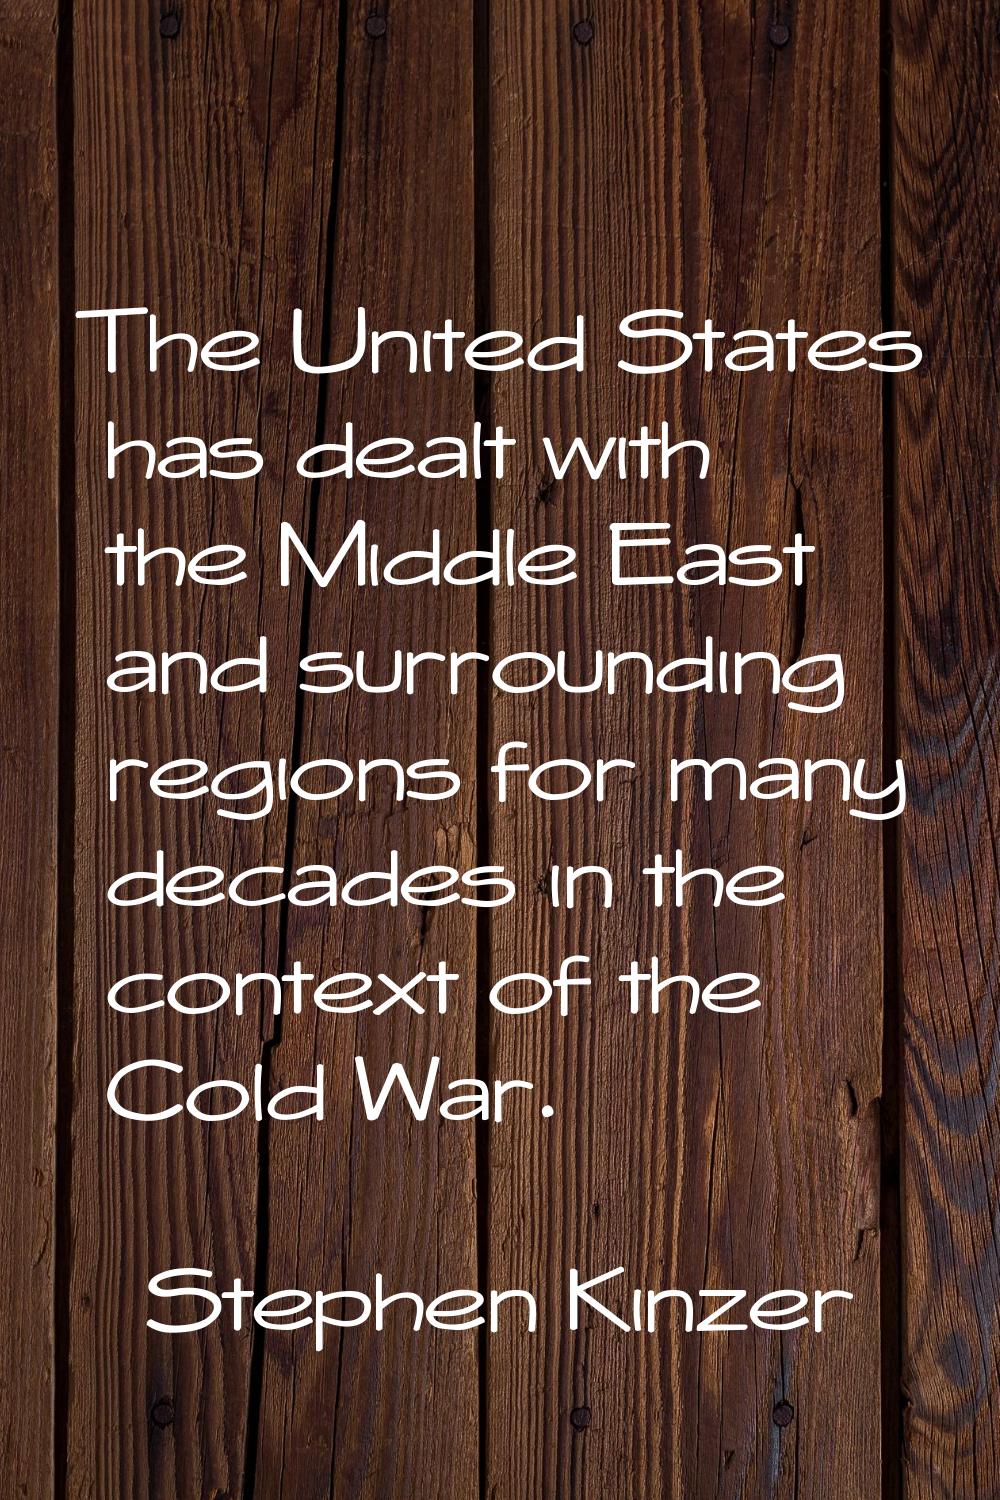 The United States has dealt with the Middle East and surrounding regions for many decades in the co